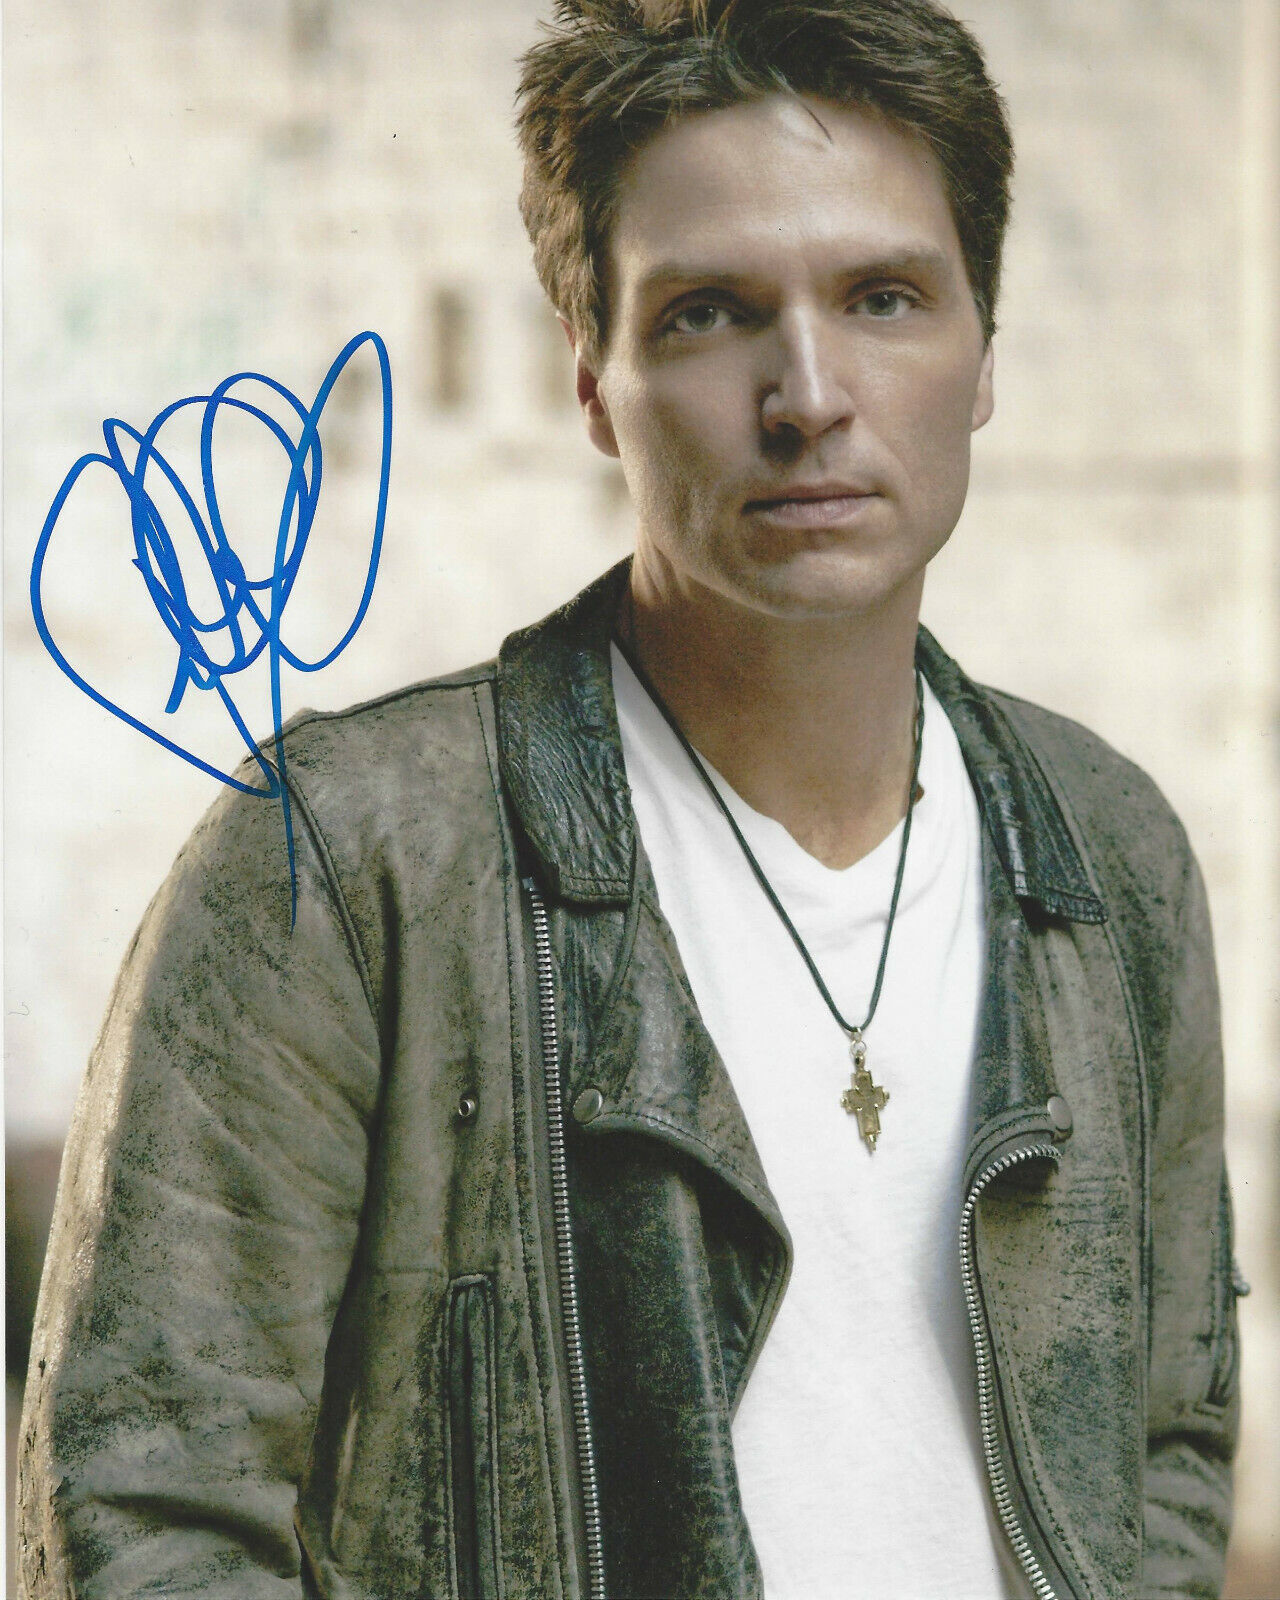 SINGER RICHARD MARX SIGNED AUTOGRAPHED AUTHENTIC 8x10 Photo Poster painting 5 w/COA RUSH STREET